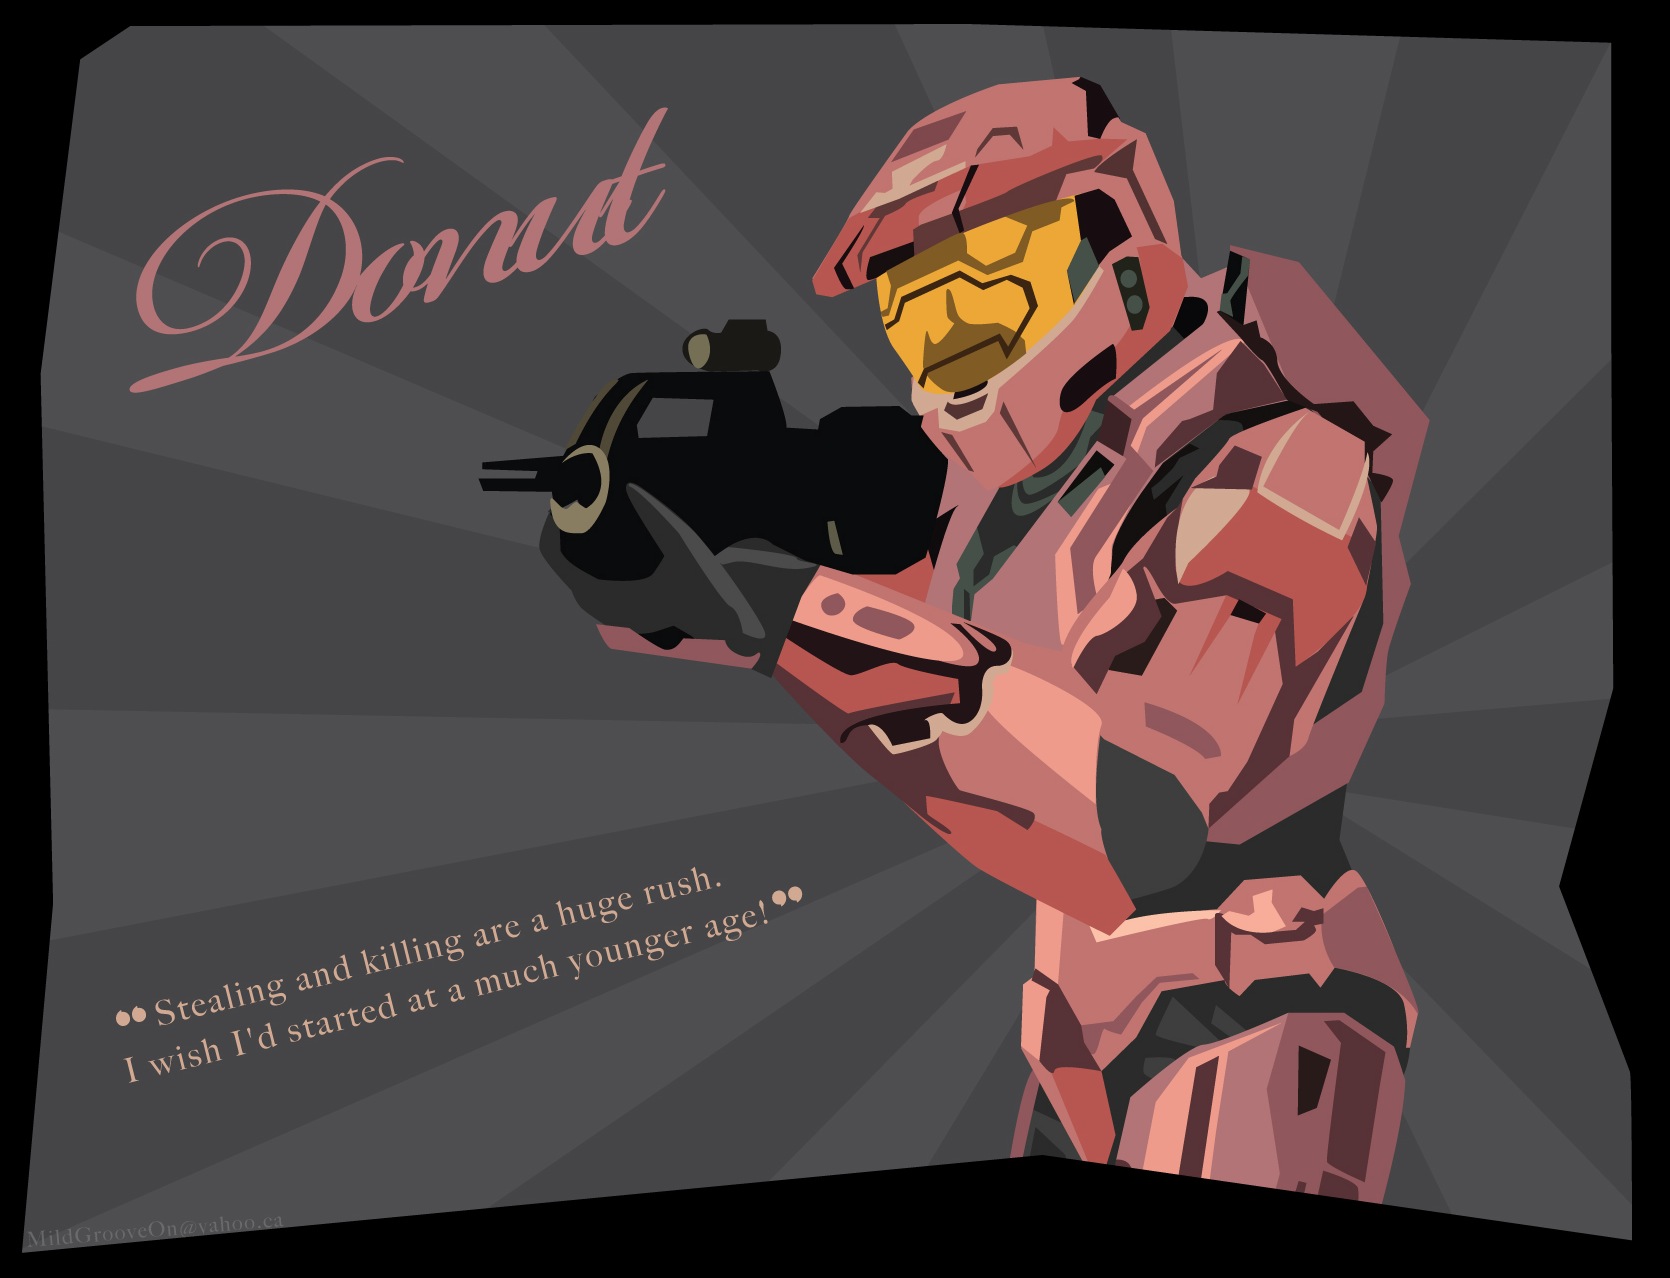 Red Vs Blue Donut Quotes.